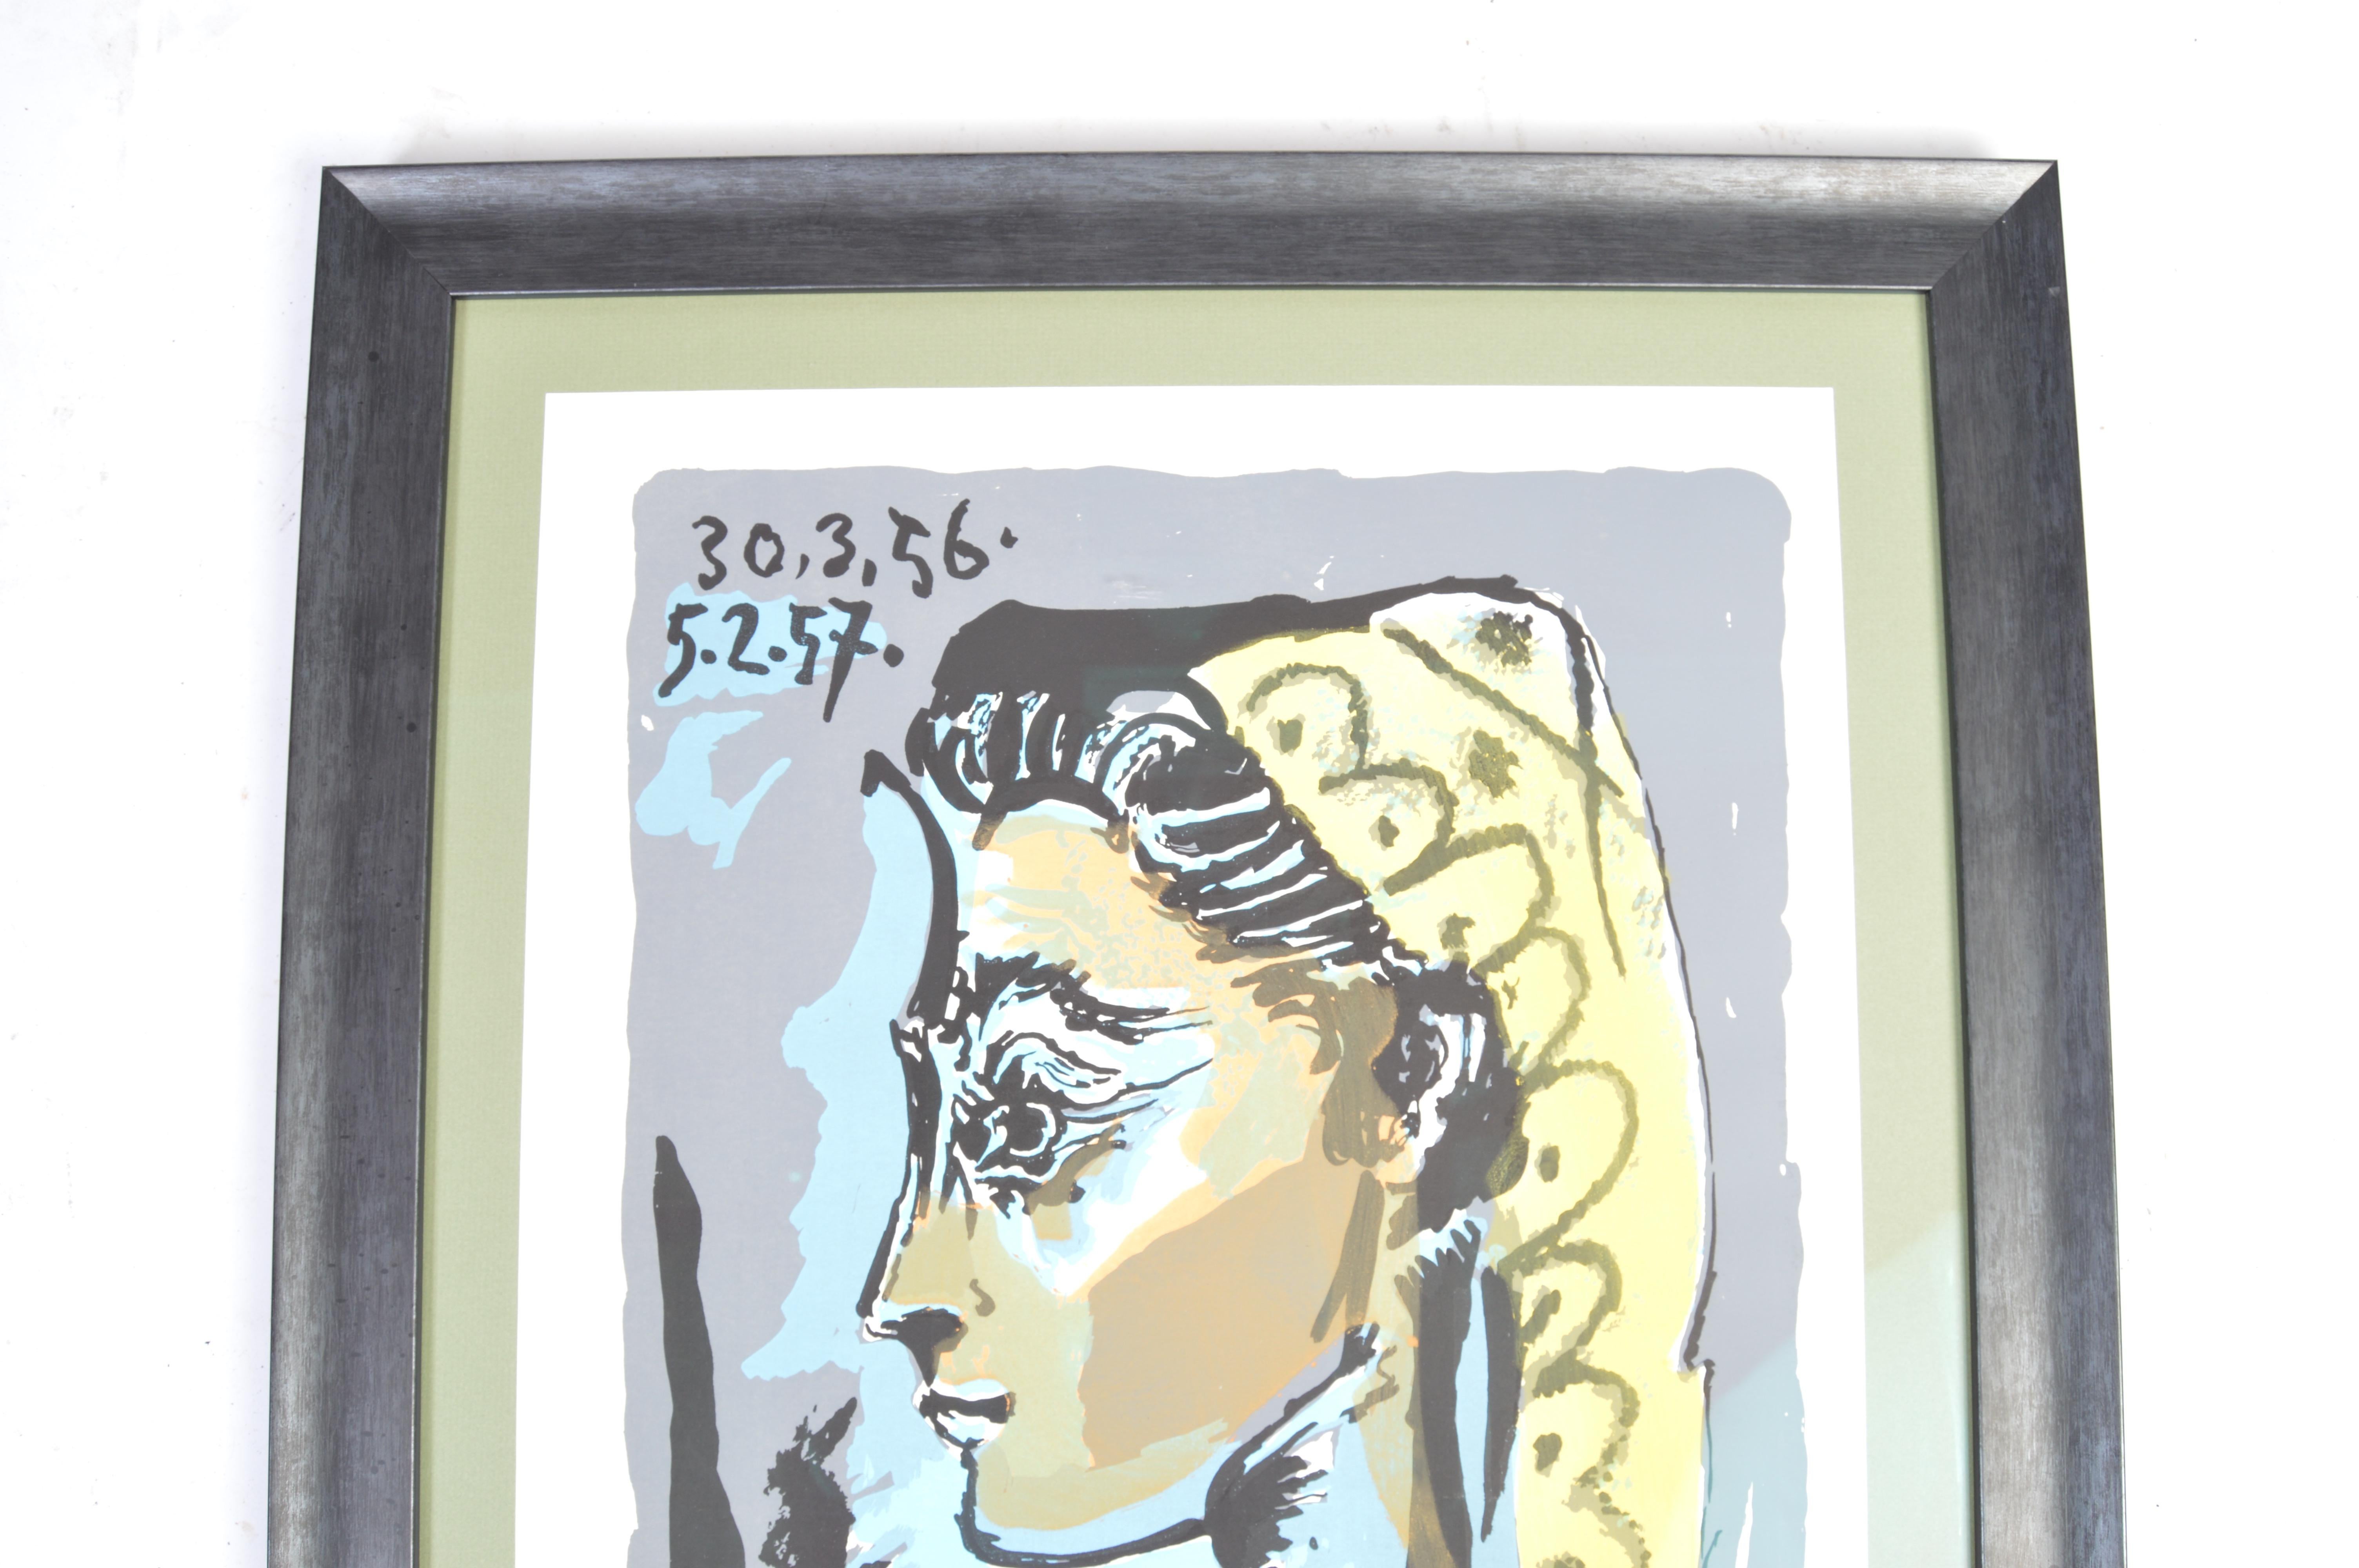 Italian Pablo Picasso 'Jacqueline' Lythograph Limited Hand Numbered